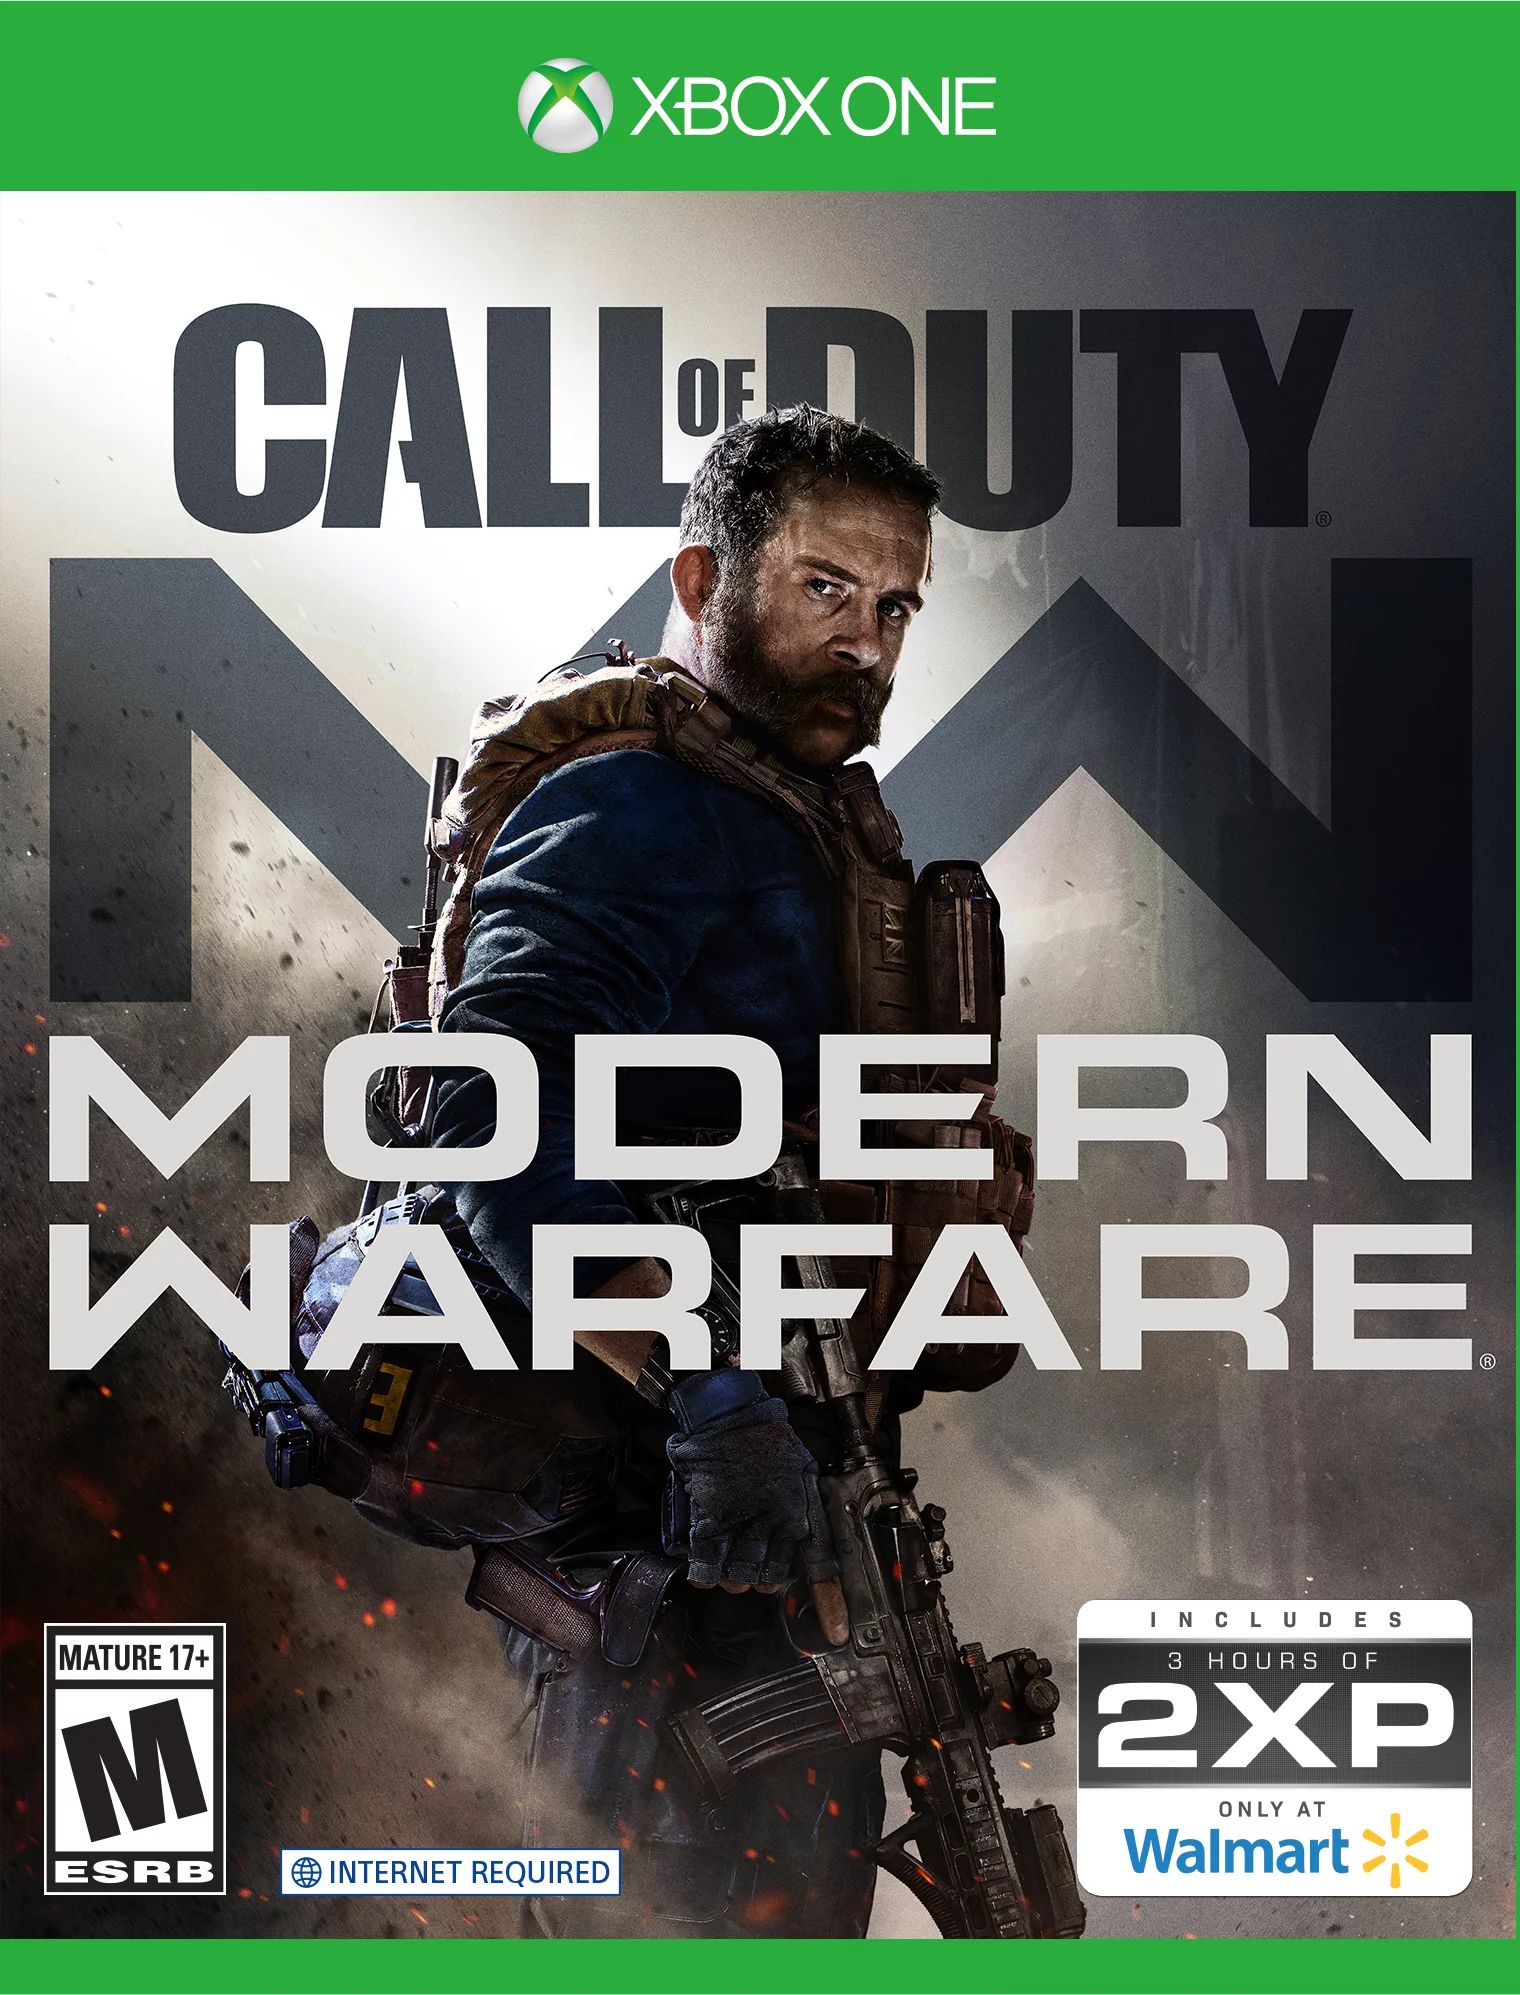 Call of Duty: Modern Warfare, Xbox One – Get 3 Hours of 2XP with game purchase – Only at Walm... | Walmart (US)